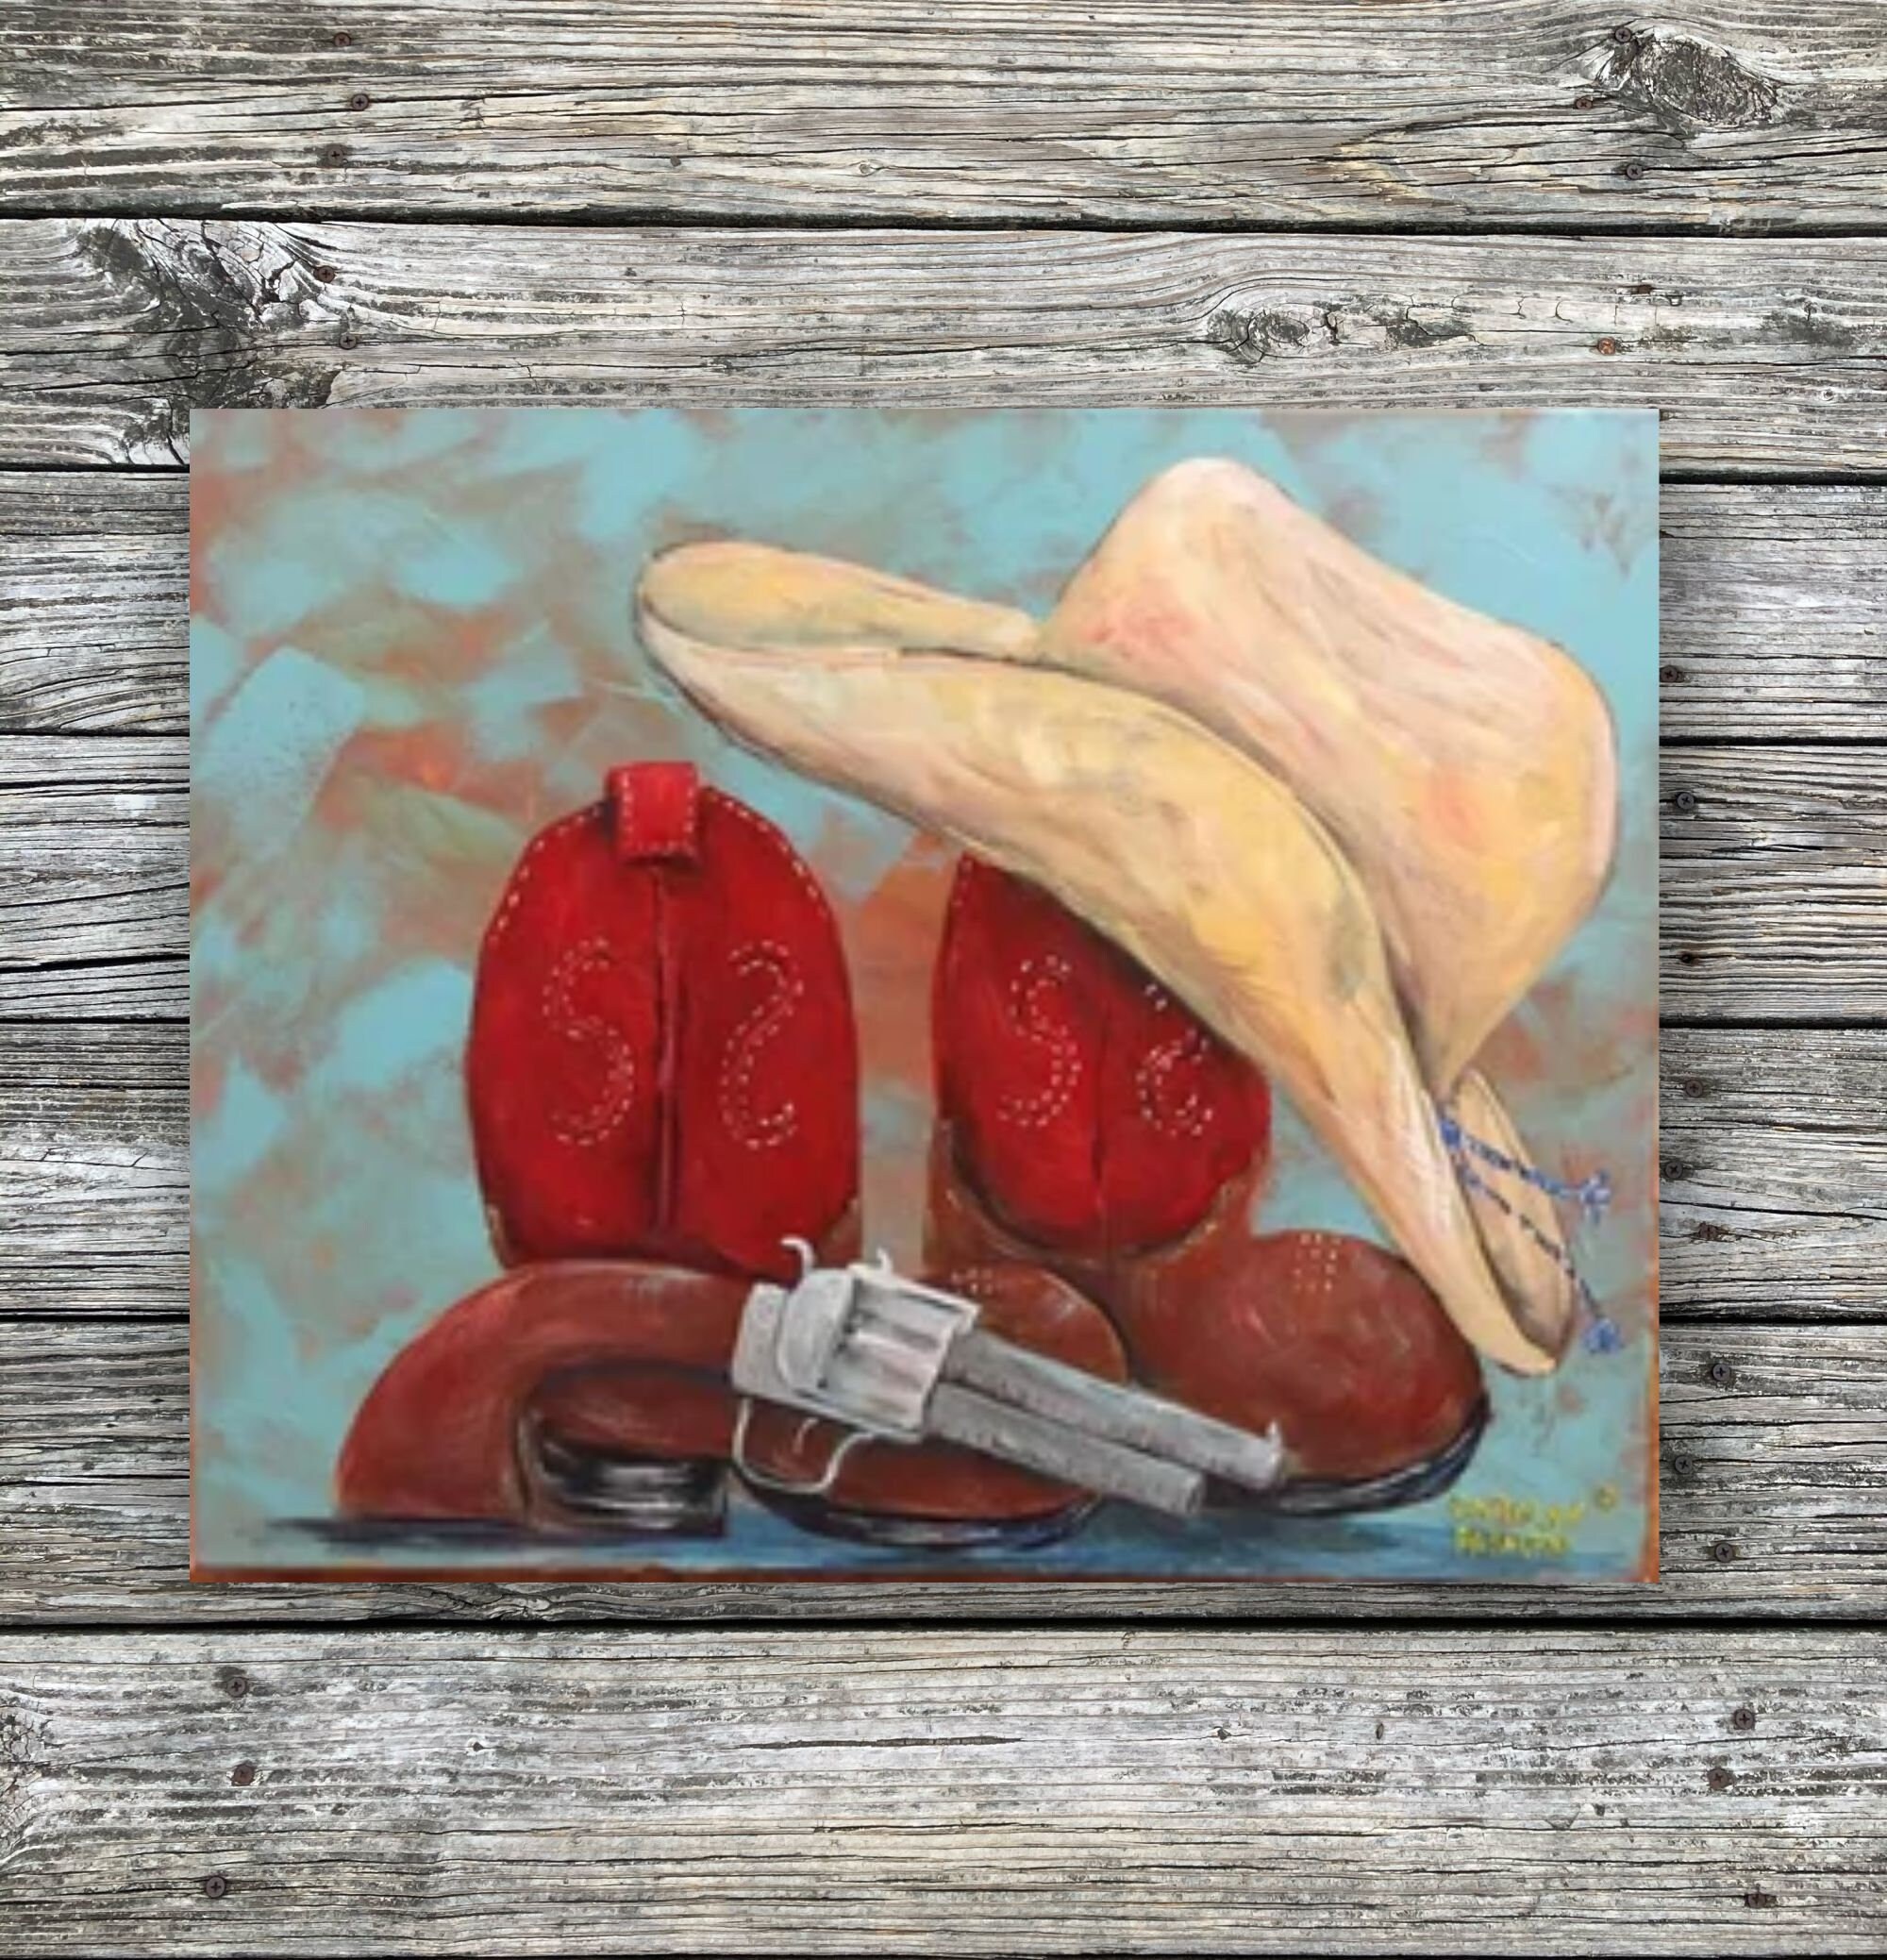 Little Cowboy Duds Original Painting Art Prints and Note Cards Western Art Prints Red top Boots and Cowboy Hat Painting Pistol